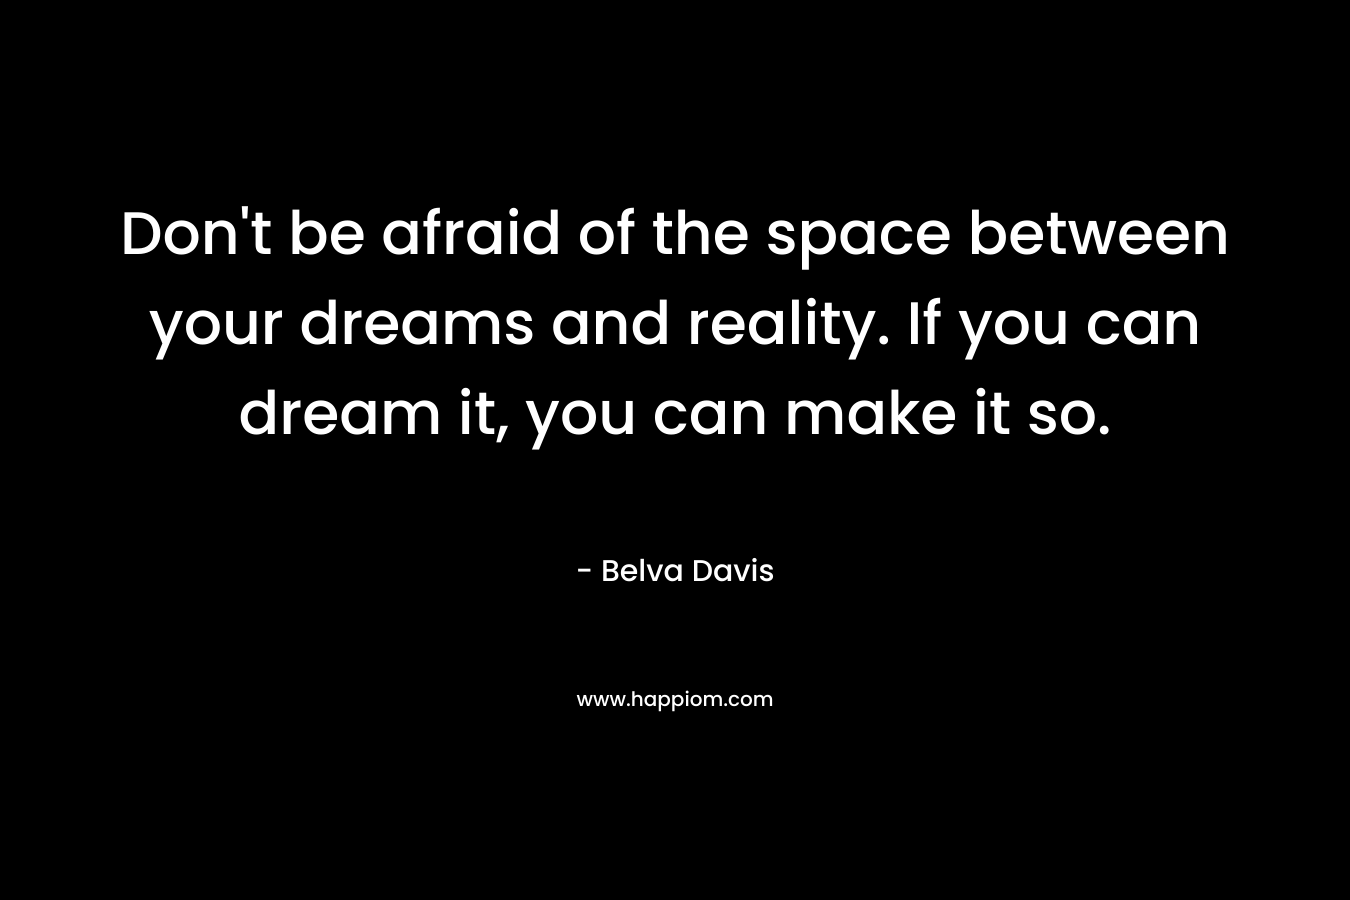 Don't be afraid of the space between your dreams and reality. If you can dream it, you can make it so.